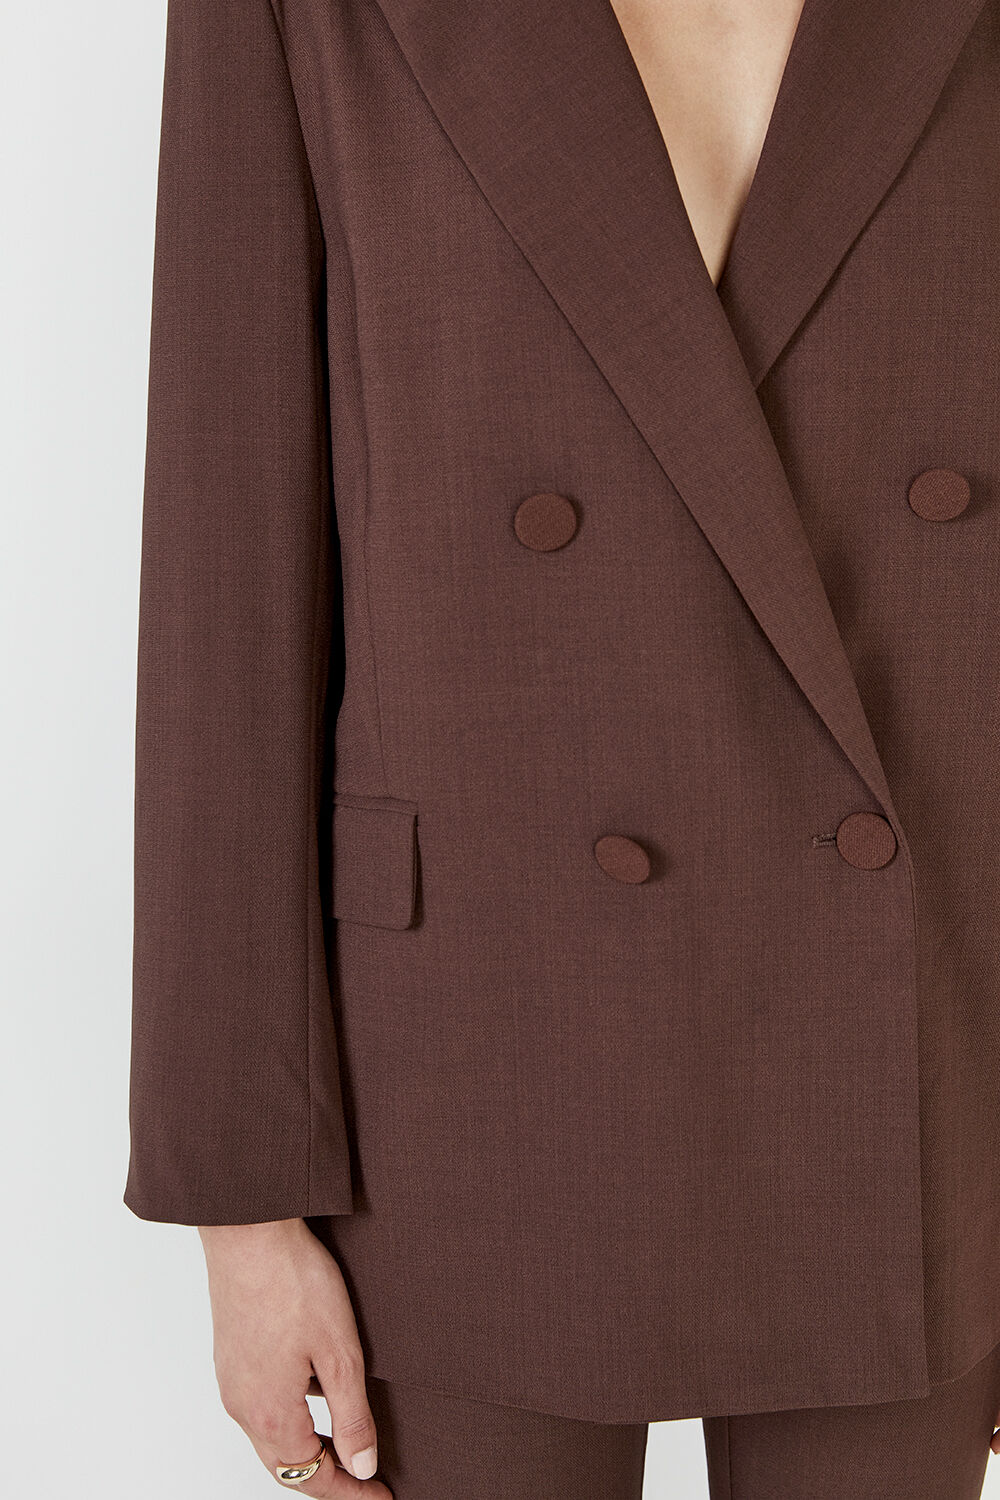 THE OVER SIZED BLAZER in colour BITTER CHOCOLATE